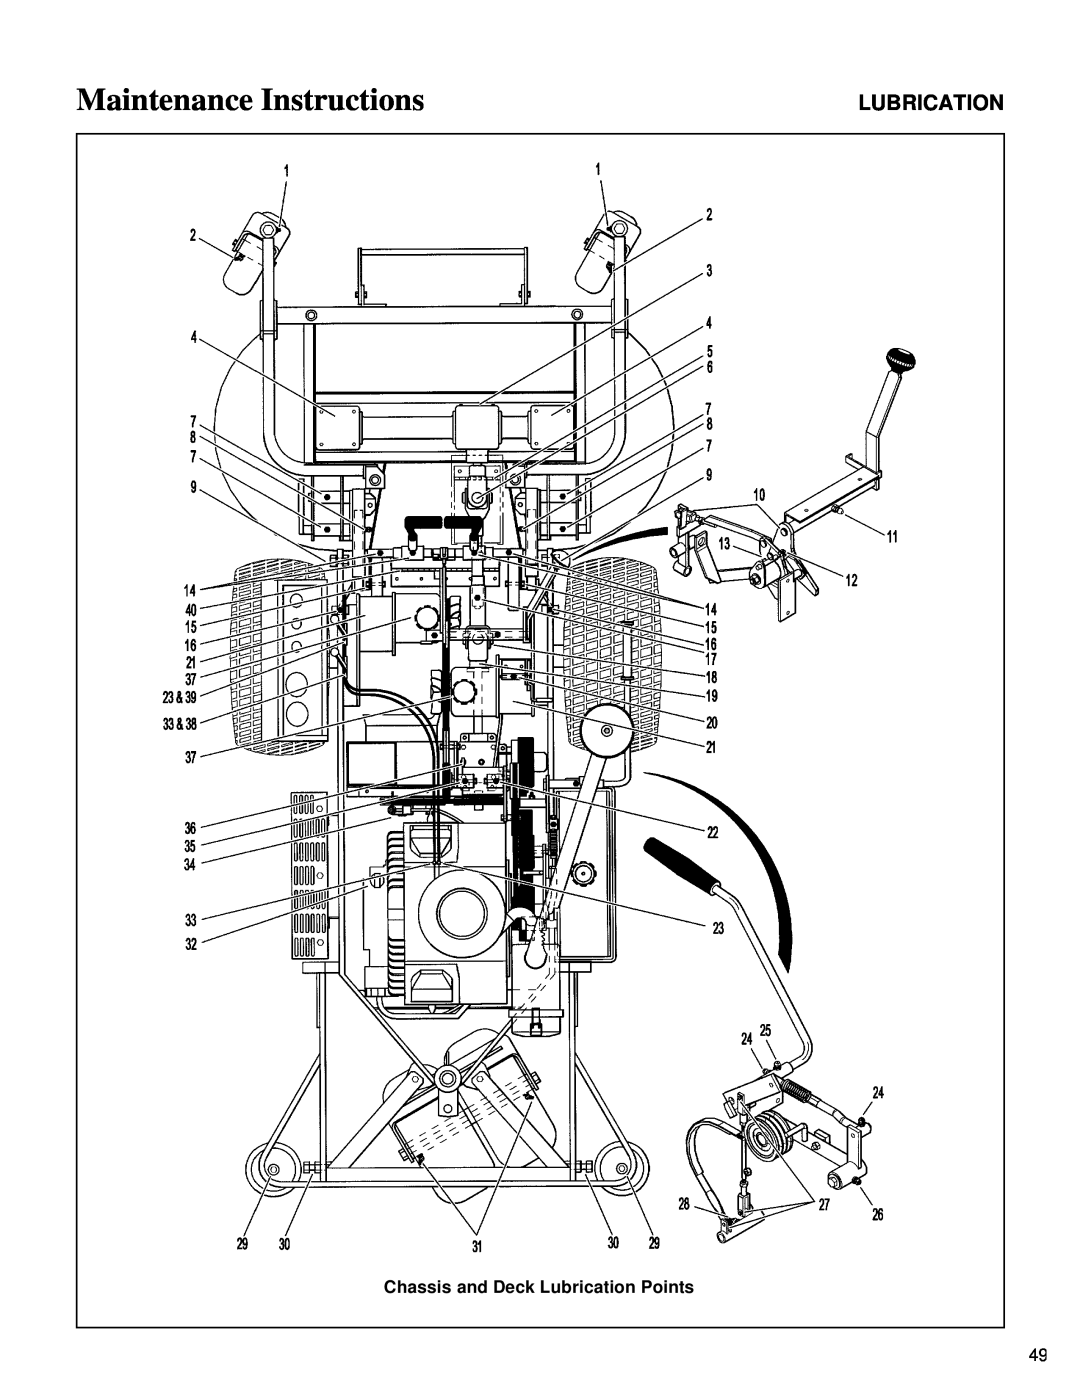 Walker MT owner manual Maintenance Instructions, Chassis and Deck Lubrication Points 